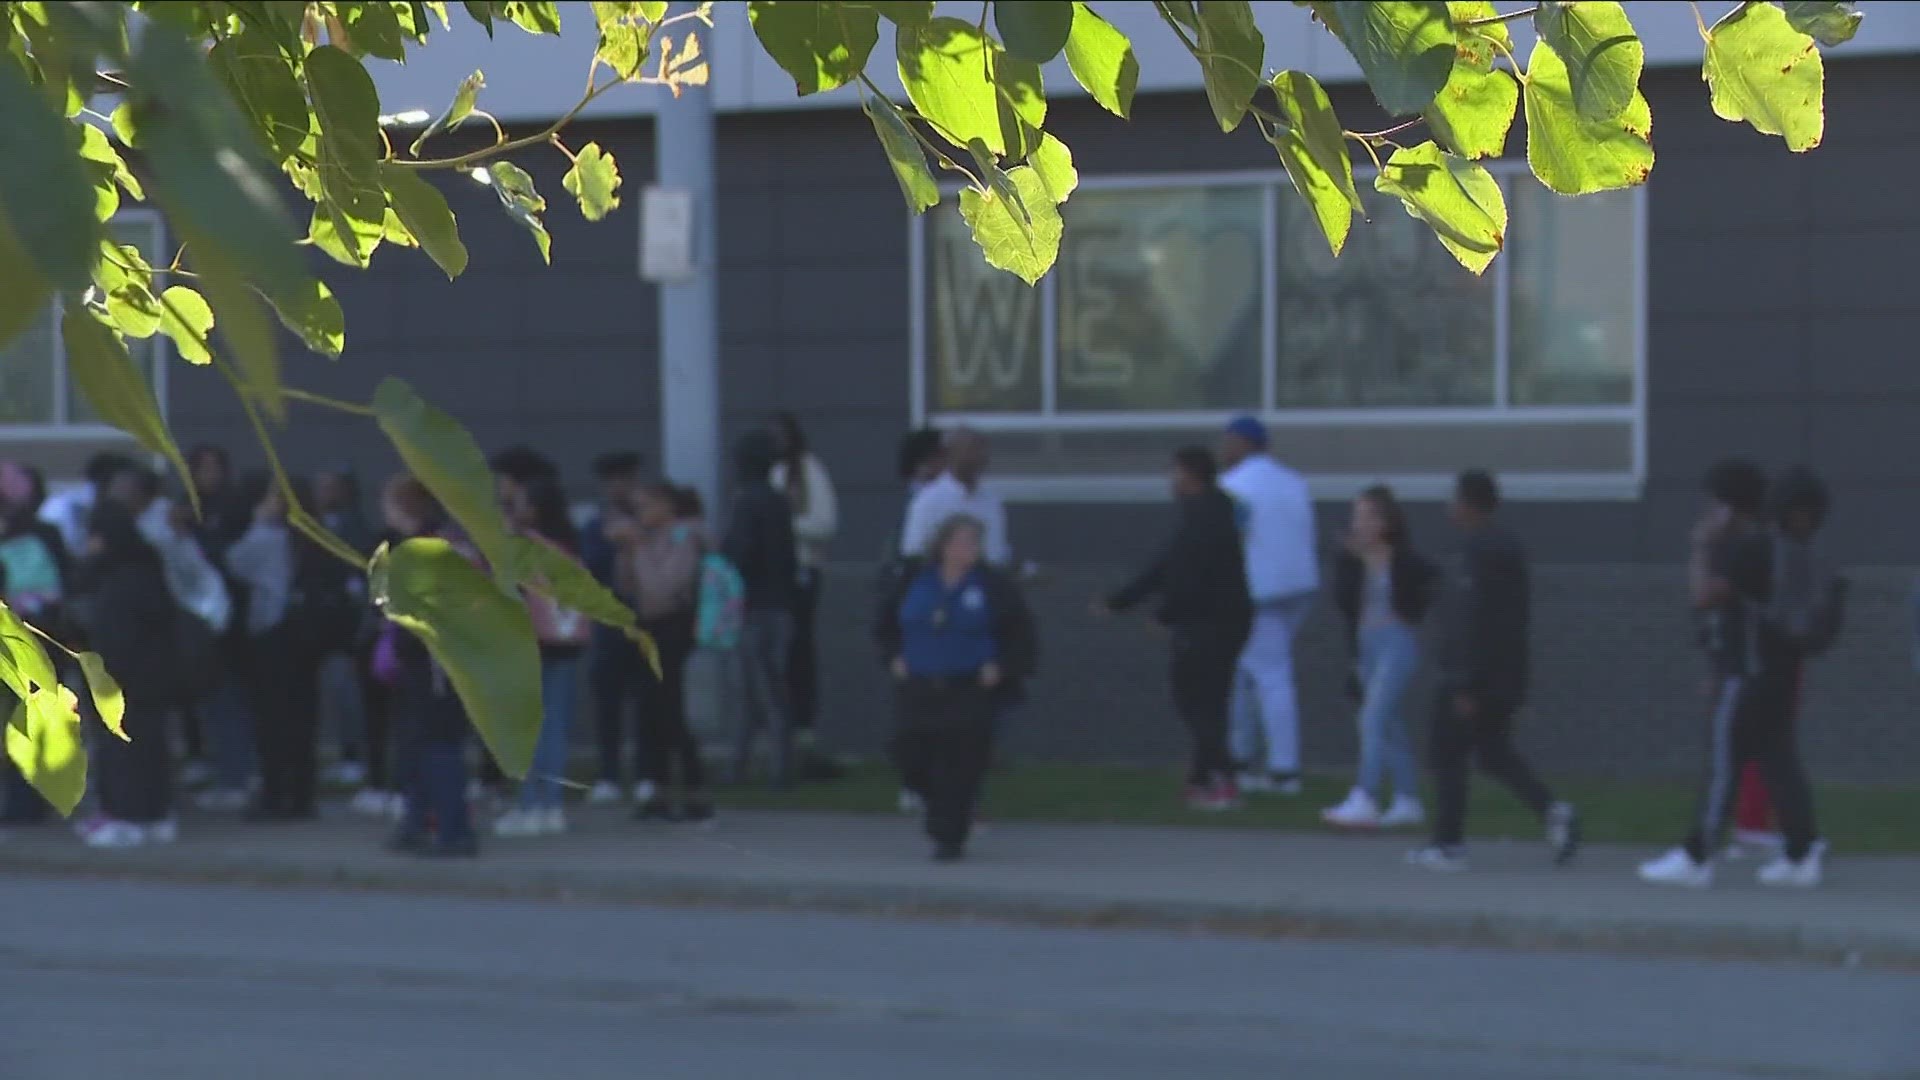 Buffalo Public Schools parents concerned about student safety